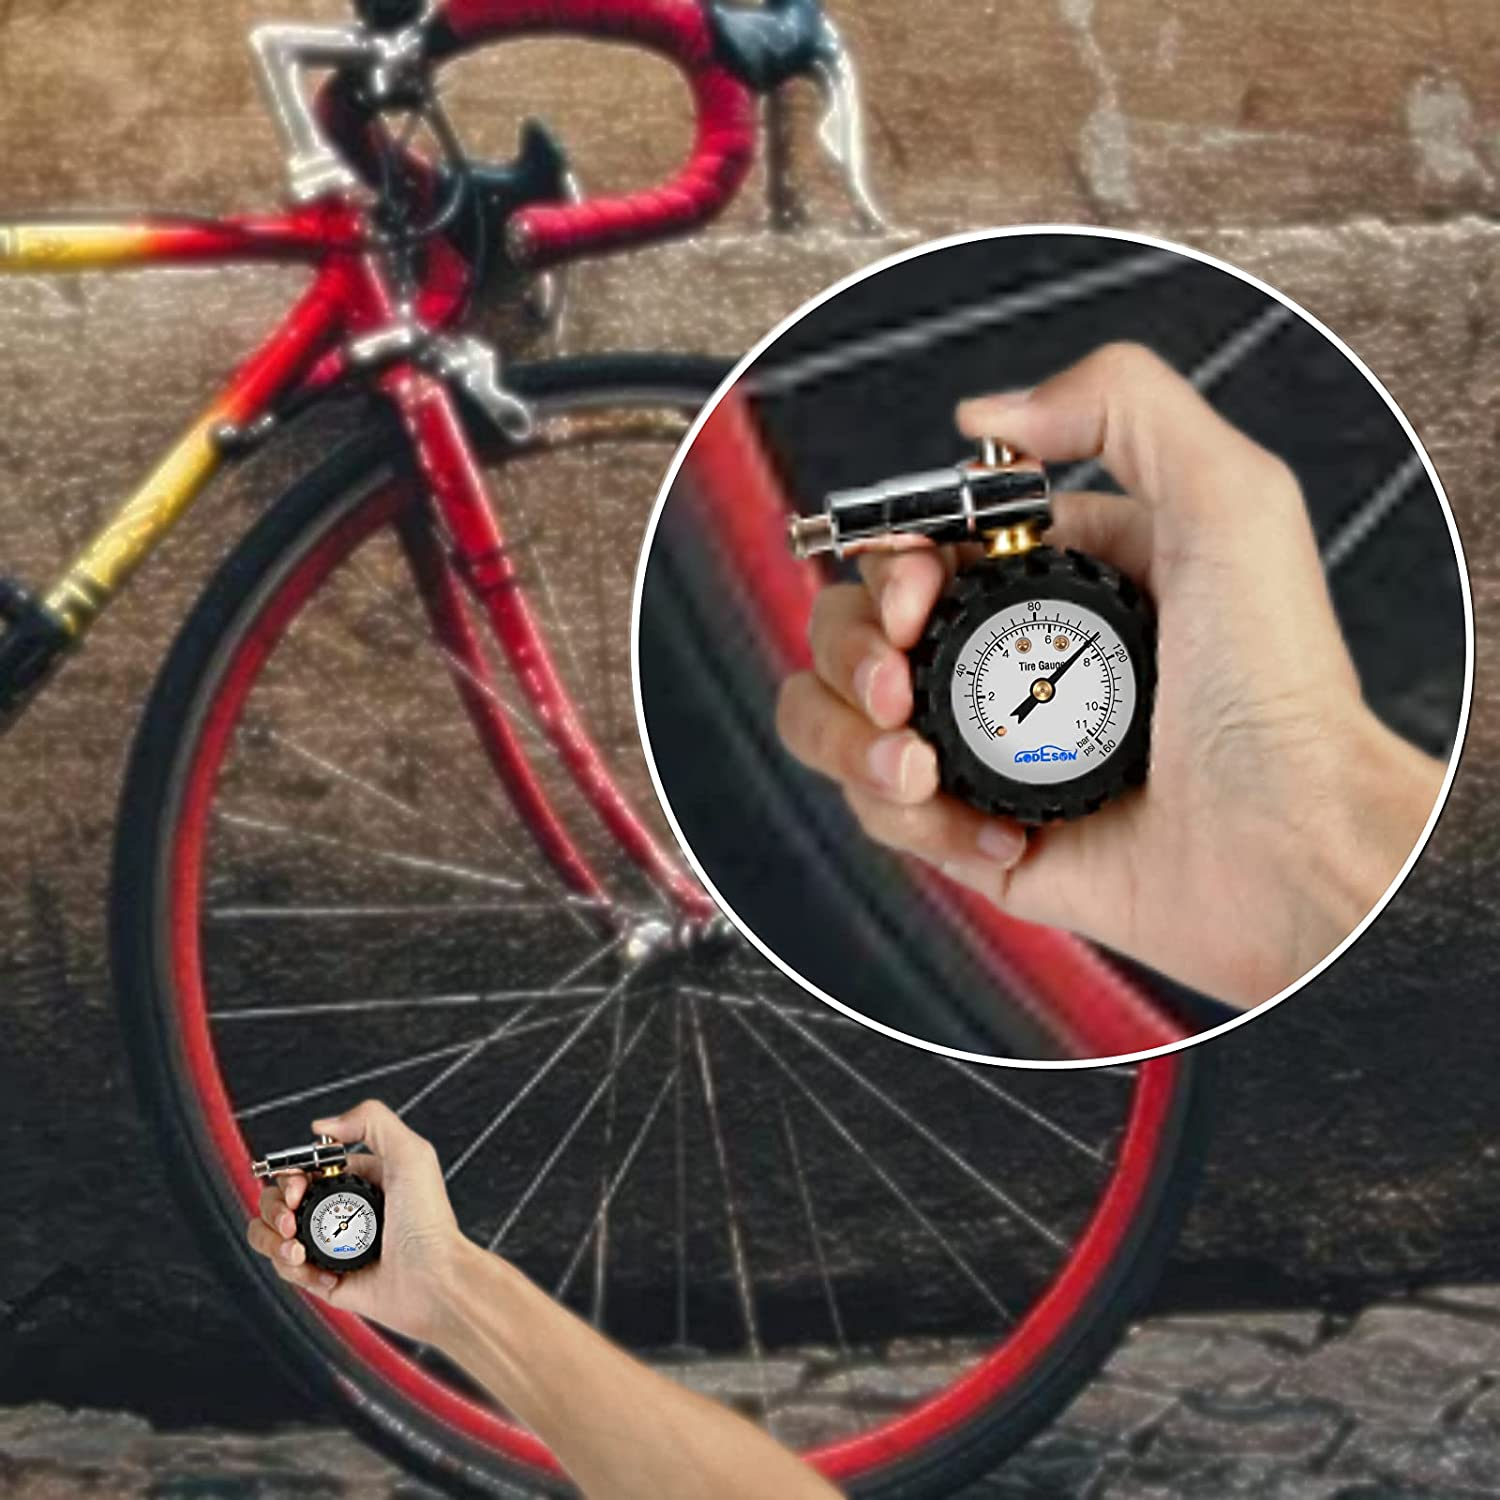 To make sure that you have the ideal mountain bike tire pressure, use a pressure gauge like this one.  